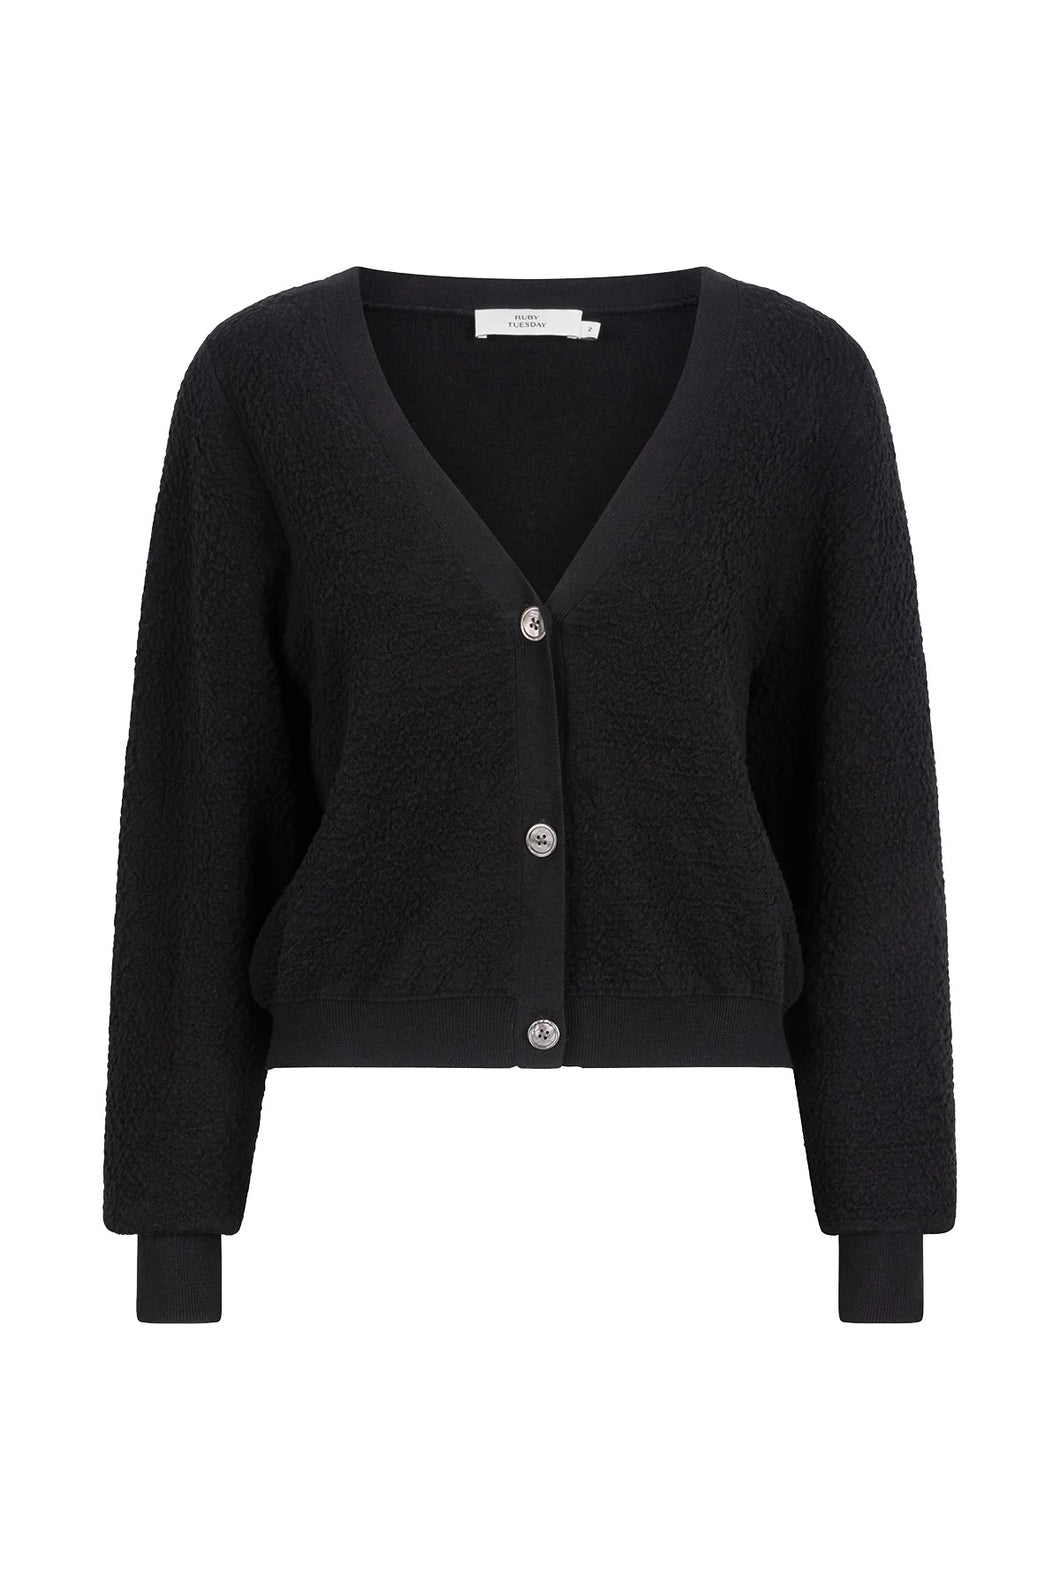 Ruby Tuesday Vasmee Cardigan (Color Options)